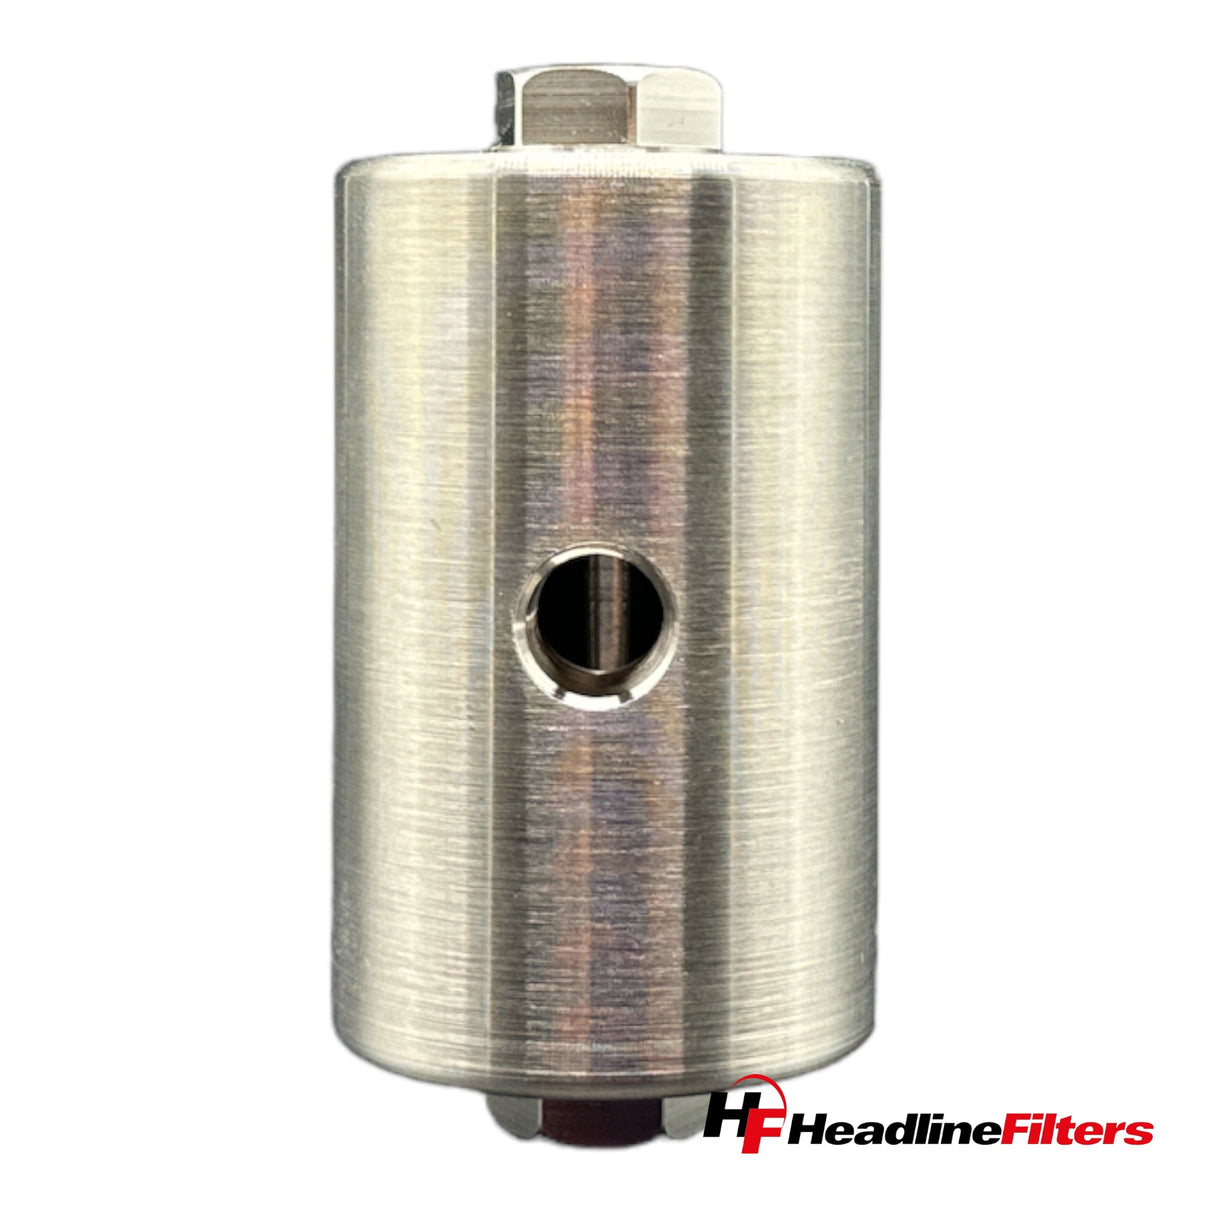 Stainless Steel Filter Housing - Model 126IL-3